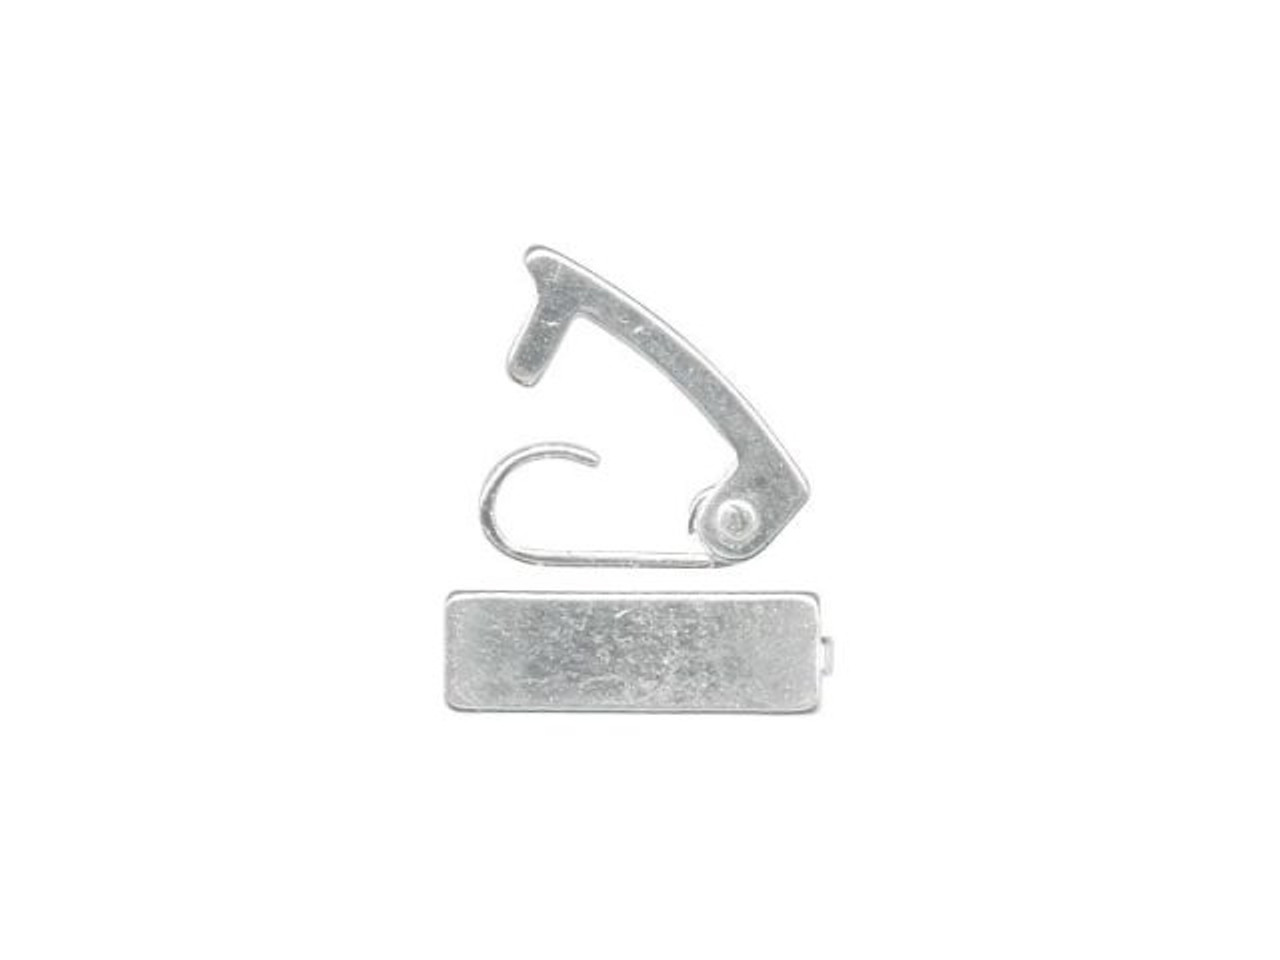 Magnetic Silver Jewelry Clasp with Safety Snap